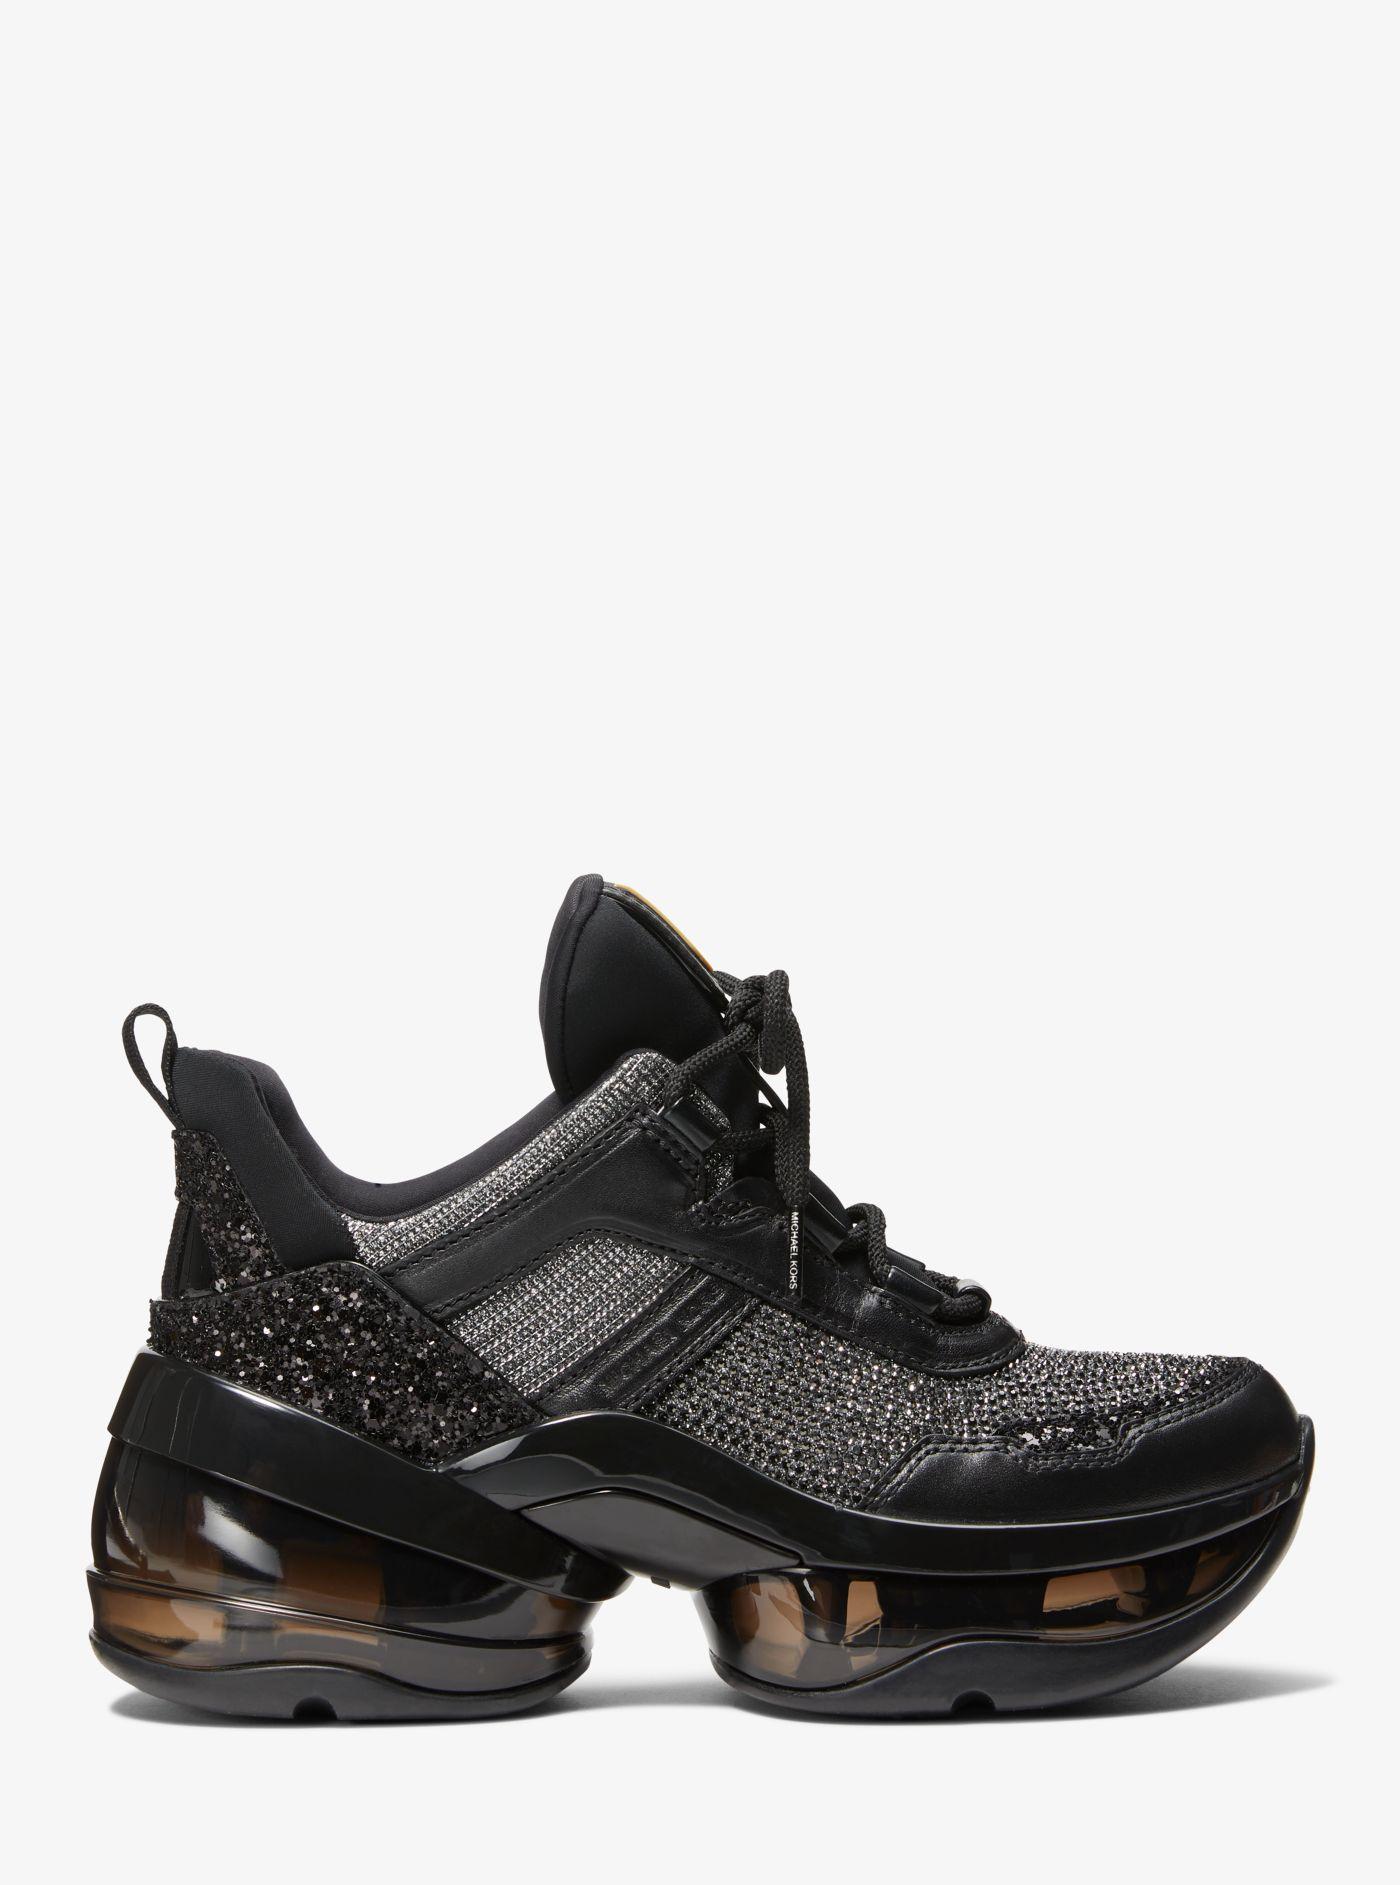 Michael Kors Olympia Extreme Embellished Leather And Glitter Chain-mesh  Trainer in Black | Lyst